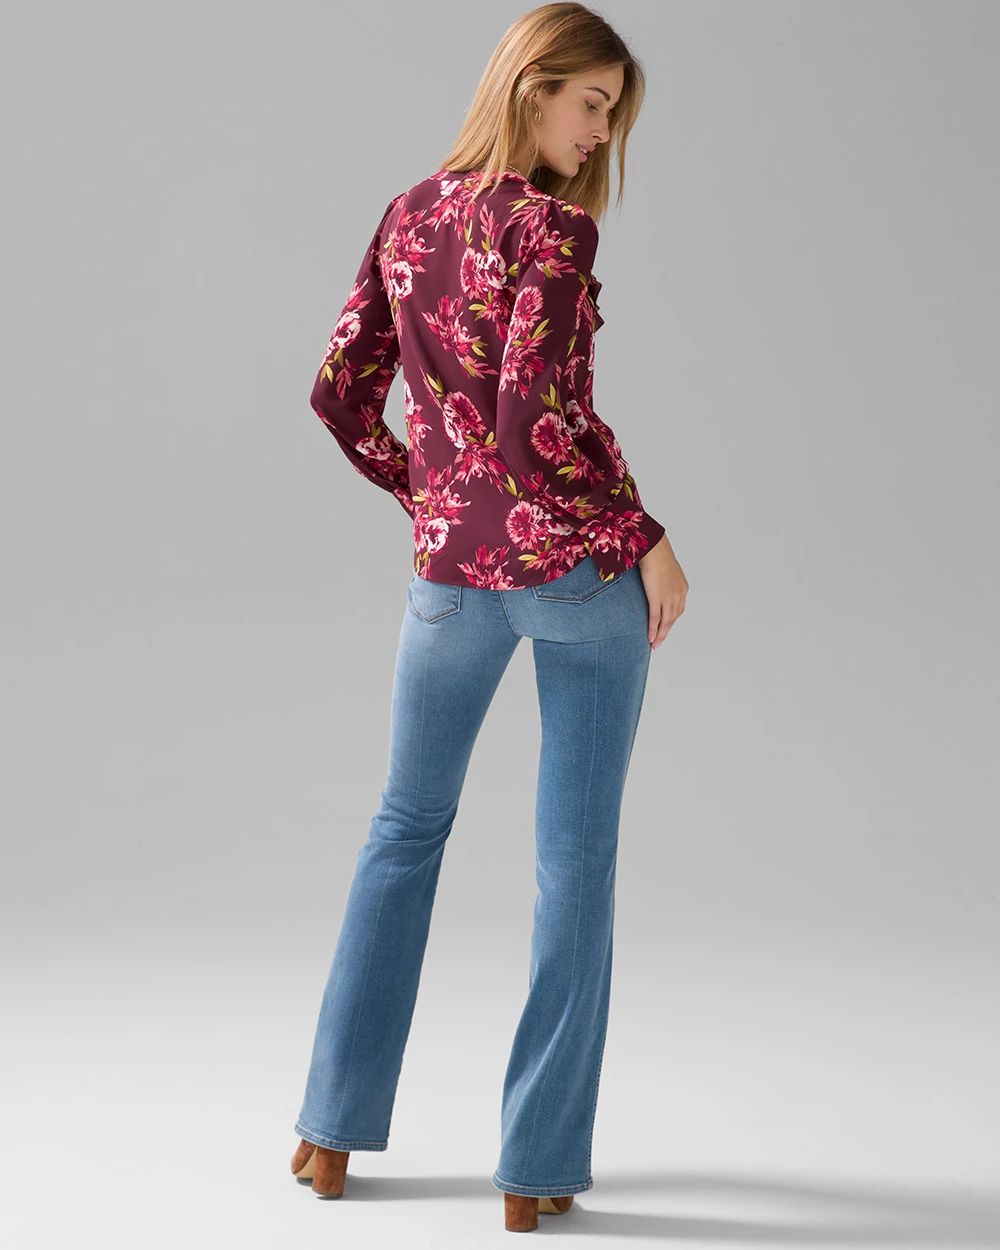 Long Sleeve Ruffle Front Blouse click to view larger image.